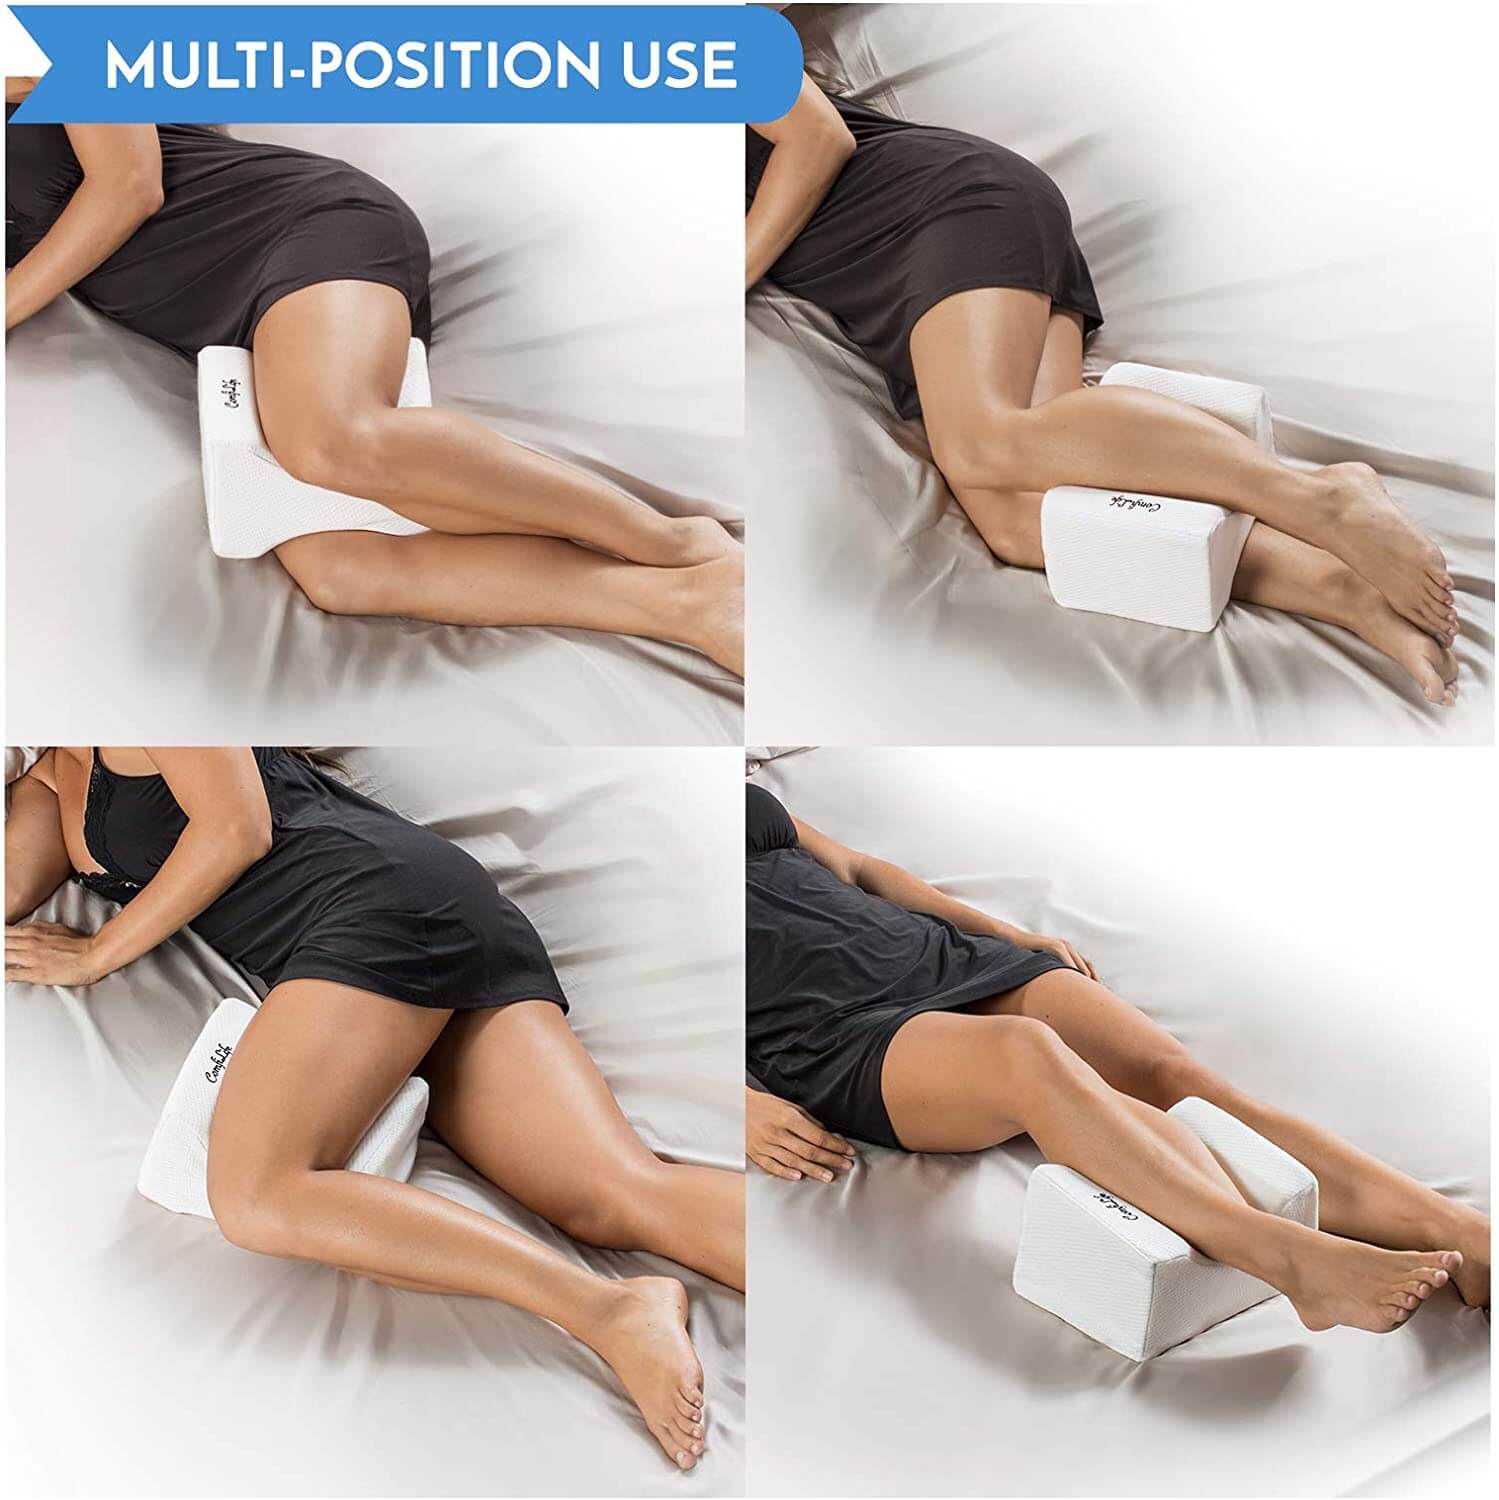 https://comfilife.com/wp-content/uploads/2021/01/ComfiLife-Orthopedic-Knee-Pillow-for-Sciatica-Relief-Back-Pain-Leg-Pain-Pregnancy-Hip-and-Joint-Pain_03.jpg